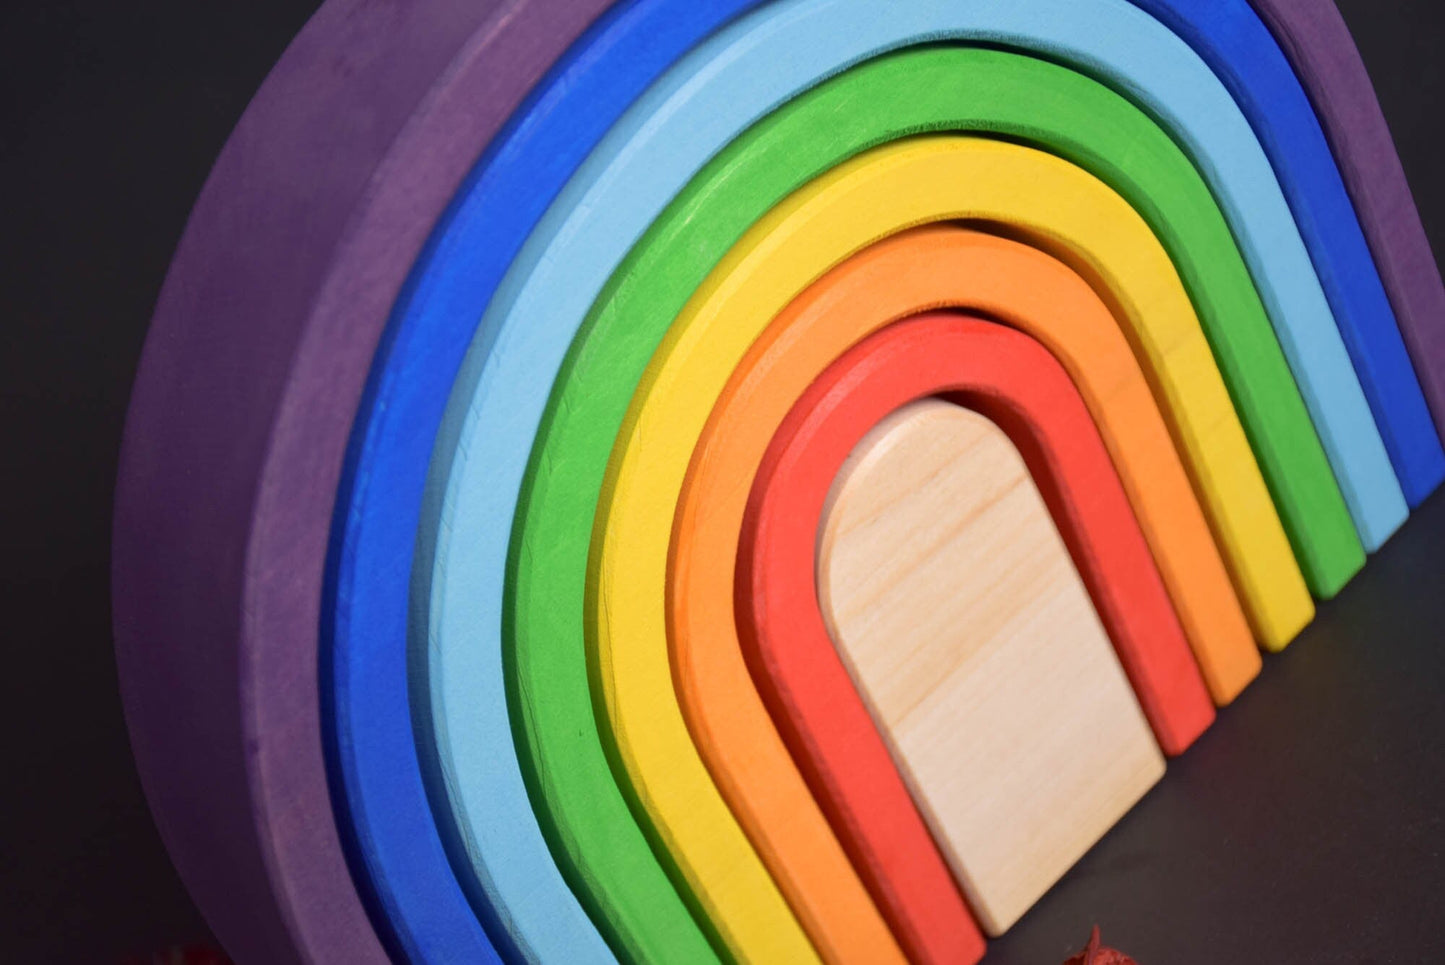 Oval Rainbow Wooden Stacking Toy, Personalized Baby Toy Gifts, Montessori Toy, Waldorf Toddler Toys, Color Sorting, Stacker Handmade Toys